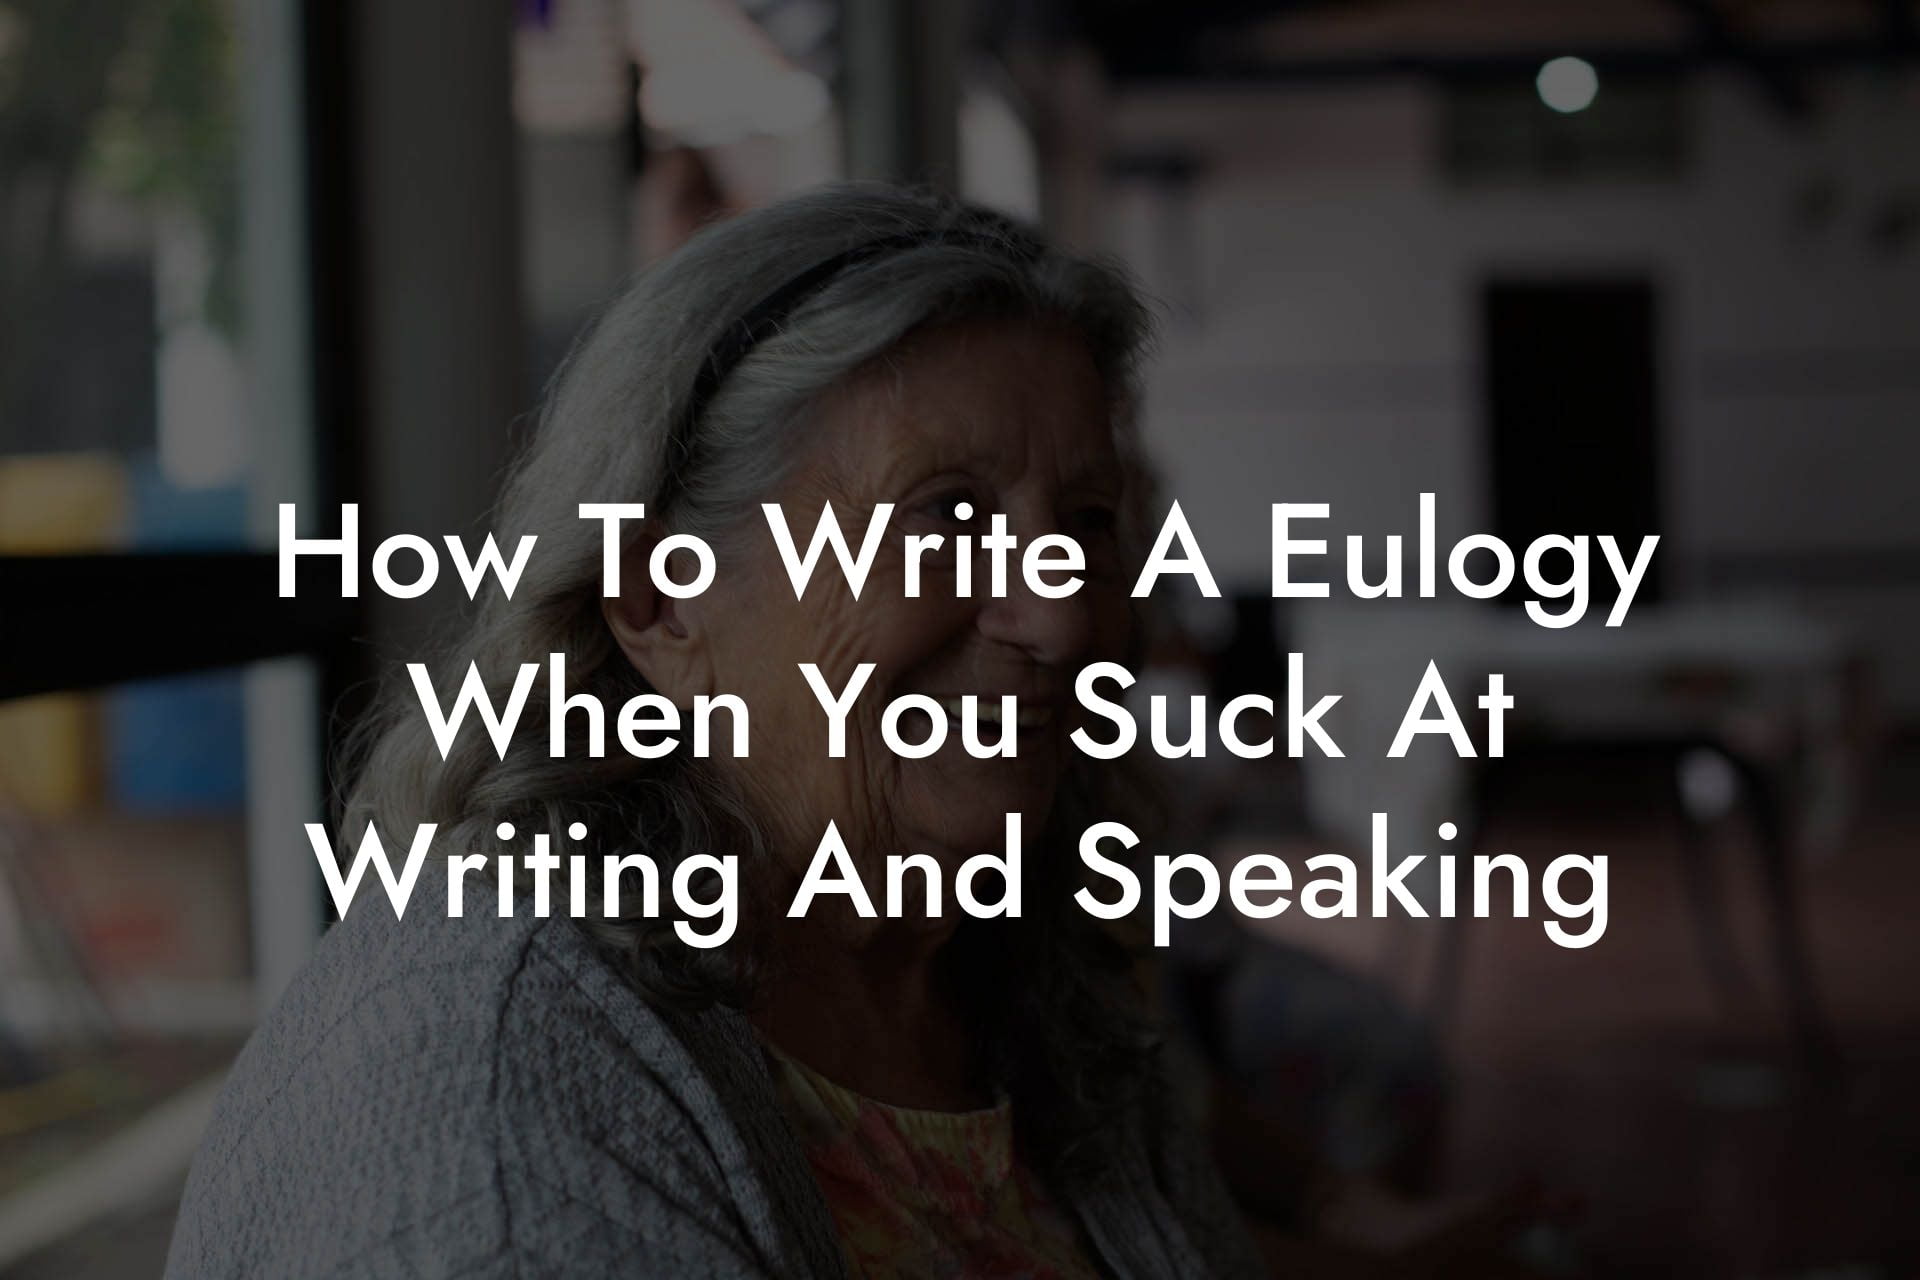 How To Write A Eulogy When You Suck At Writing And Speaking